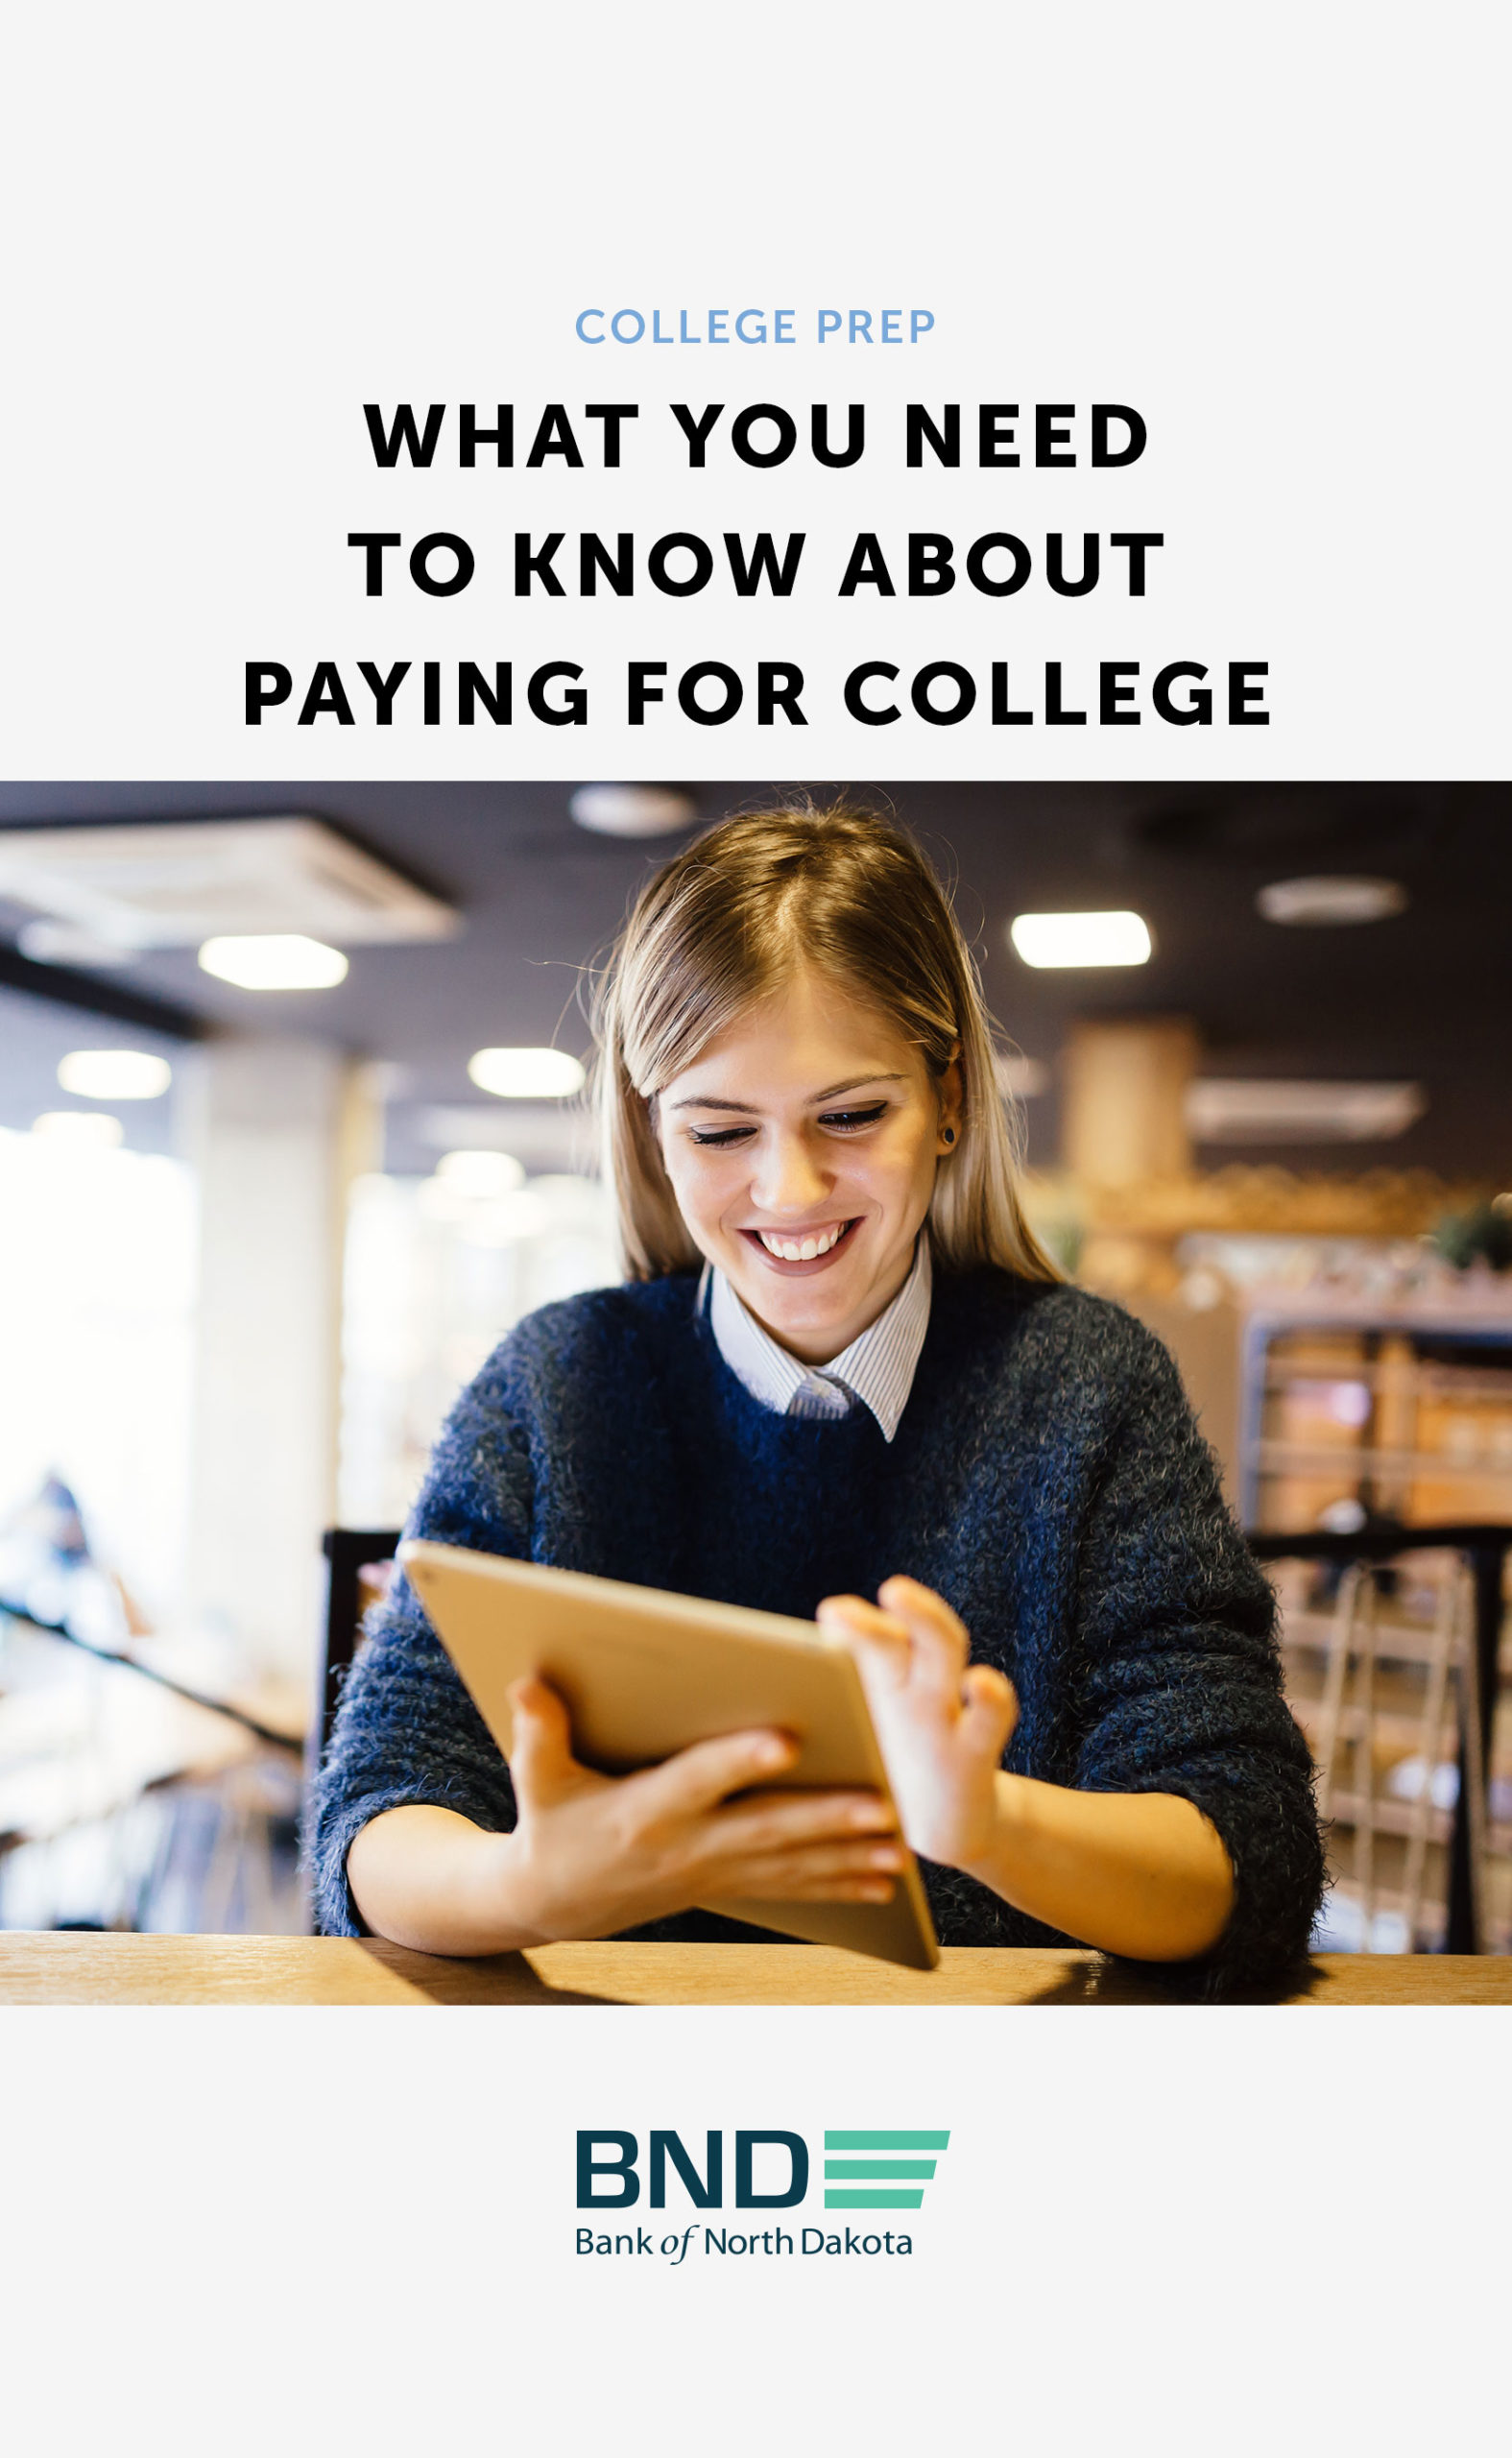 What-You-Need-Paying-For-College-post